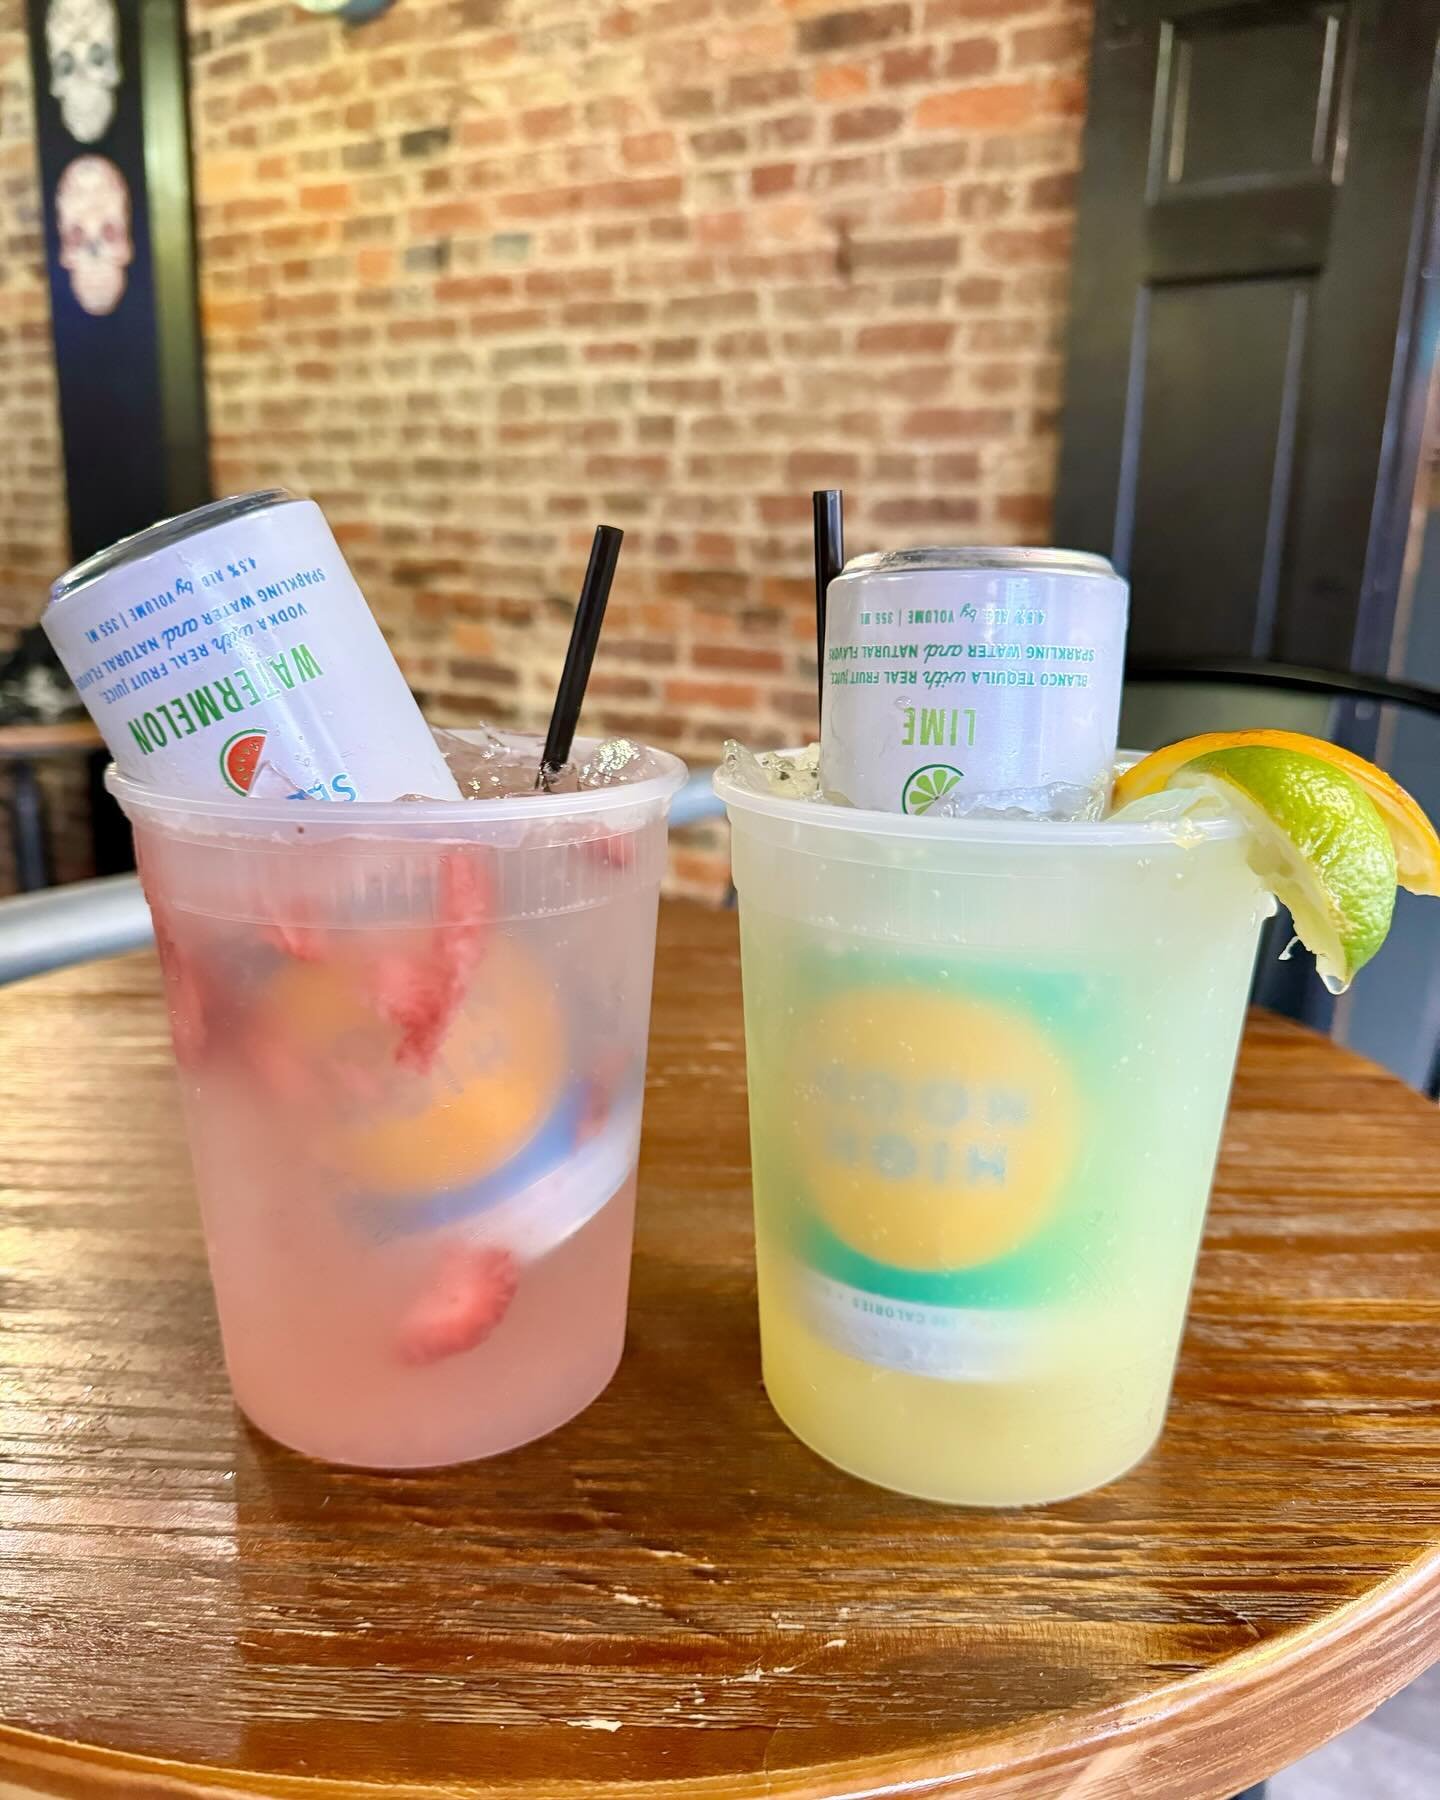 High Noon-A-Ritas Available All Weekend Long! 💀 Only available in The Tequila Bar, plus NEW Flavored Margs &amp; a Grapefruit Sunrise cocktail for only $12! Happy Cinco de Mayo Weekend 💀 #highnoon #highnoonarita #tequila #cincodemayo #westchesterpa